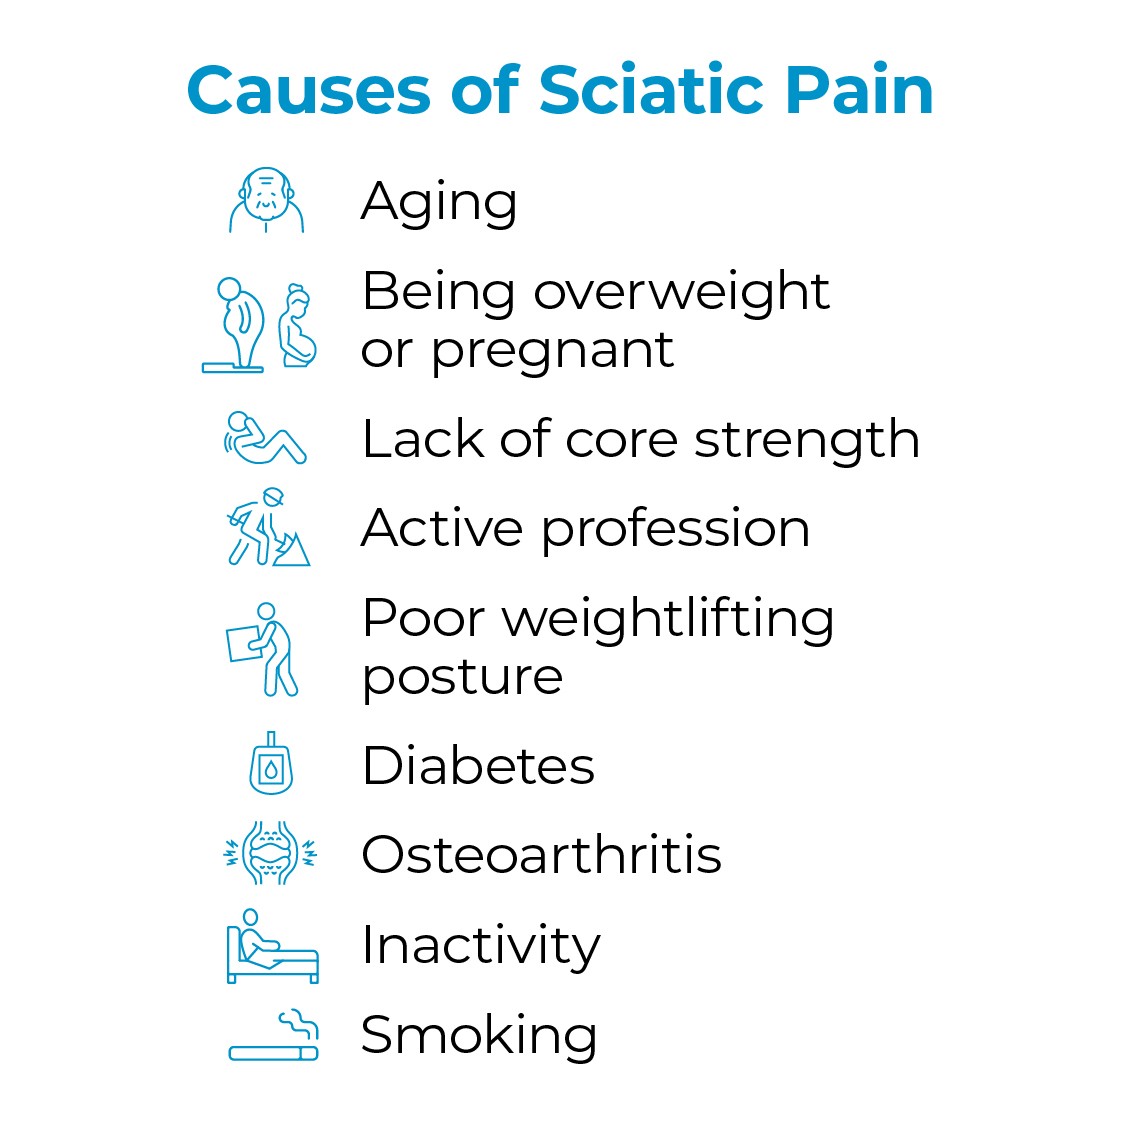 TENS pain therapy for sciatic pain